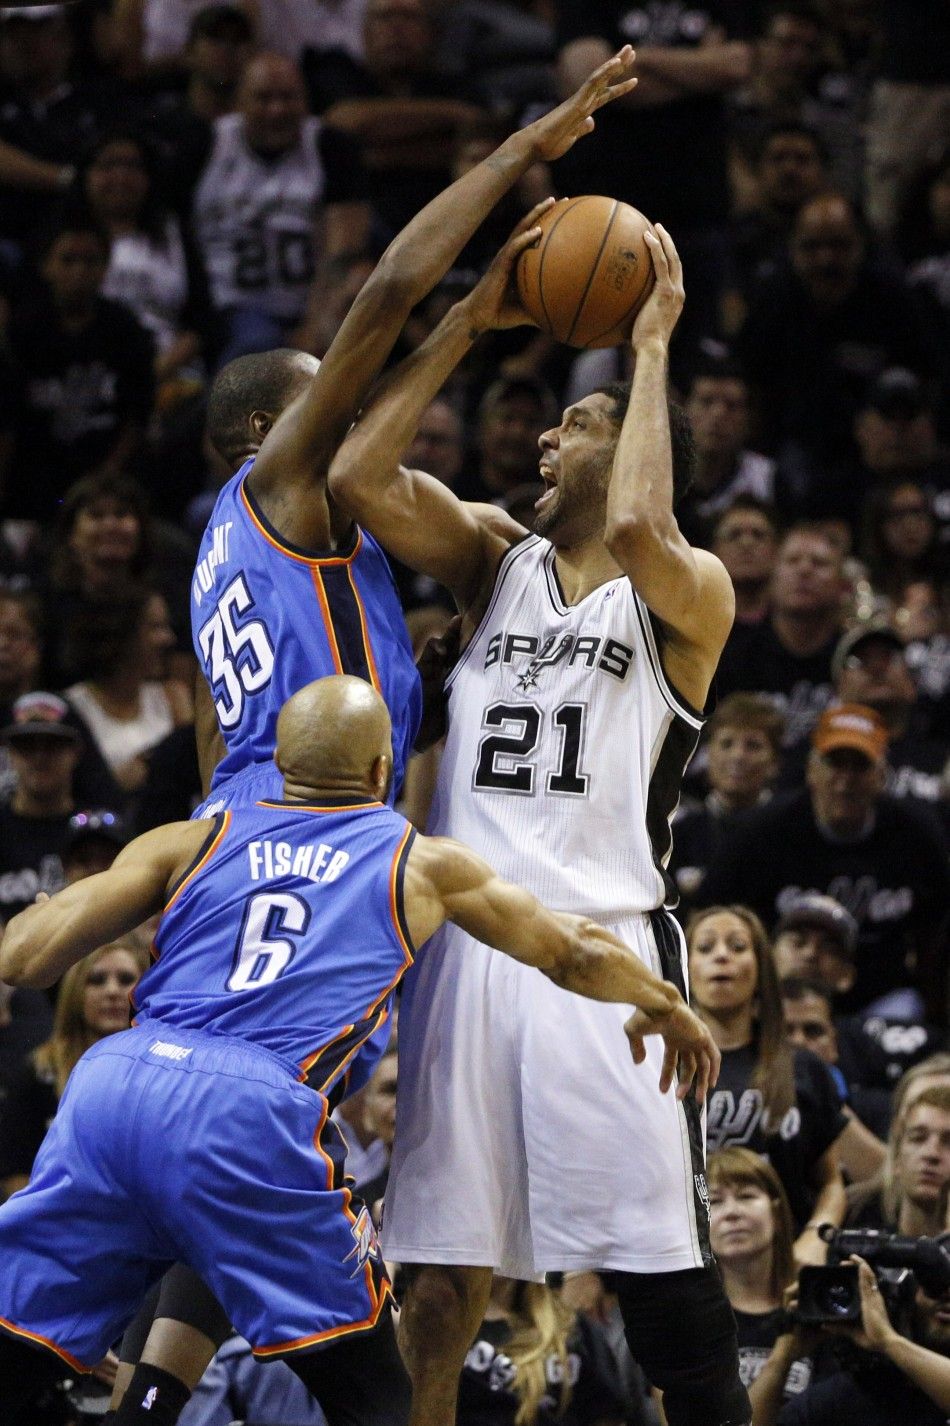 May 19, 2014 San Antonio, TX, USA San Antonio Spurs forward Tim Duncan 21 is fouled while shooting by Oklahoma City Thunder forward Kevin Durant 35 in game one of the Western Conference Finals in the 2014 NBA Playoffs at ATT Center. 